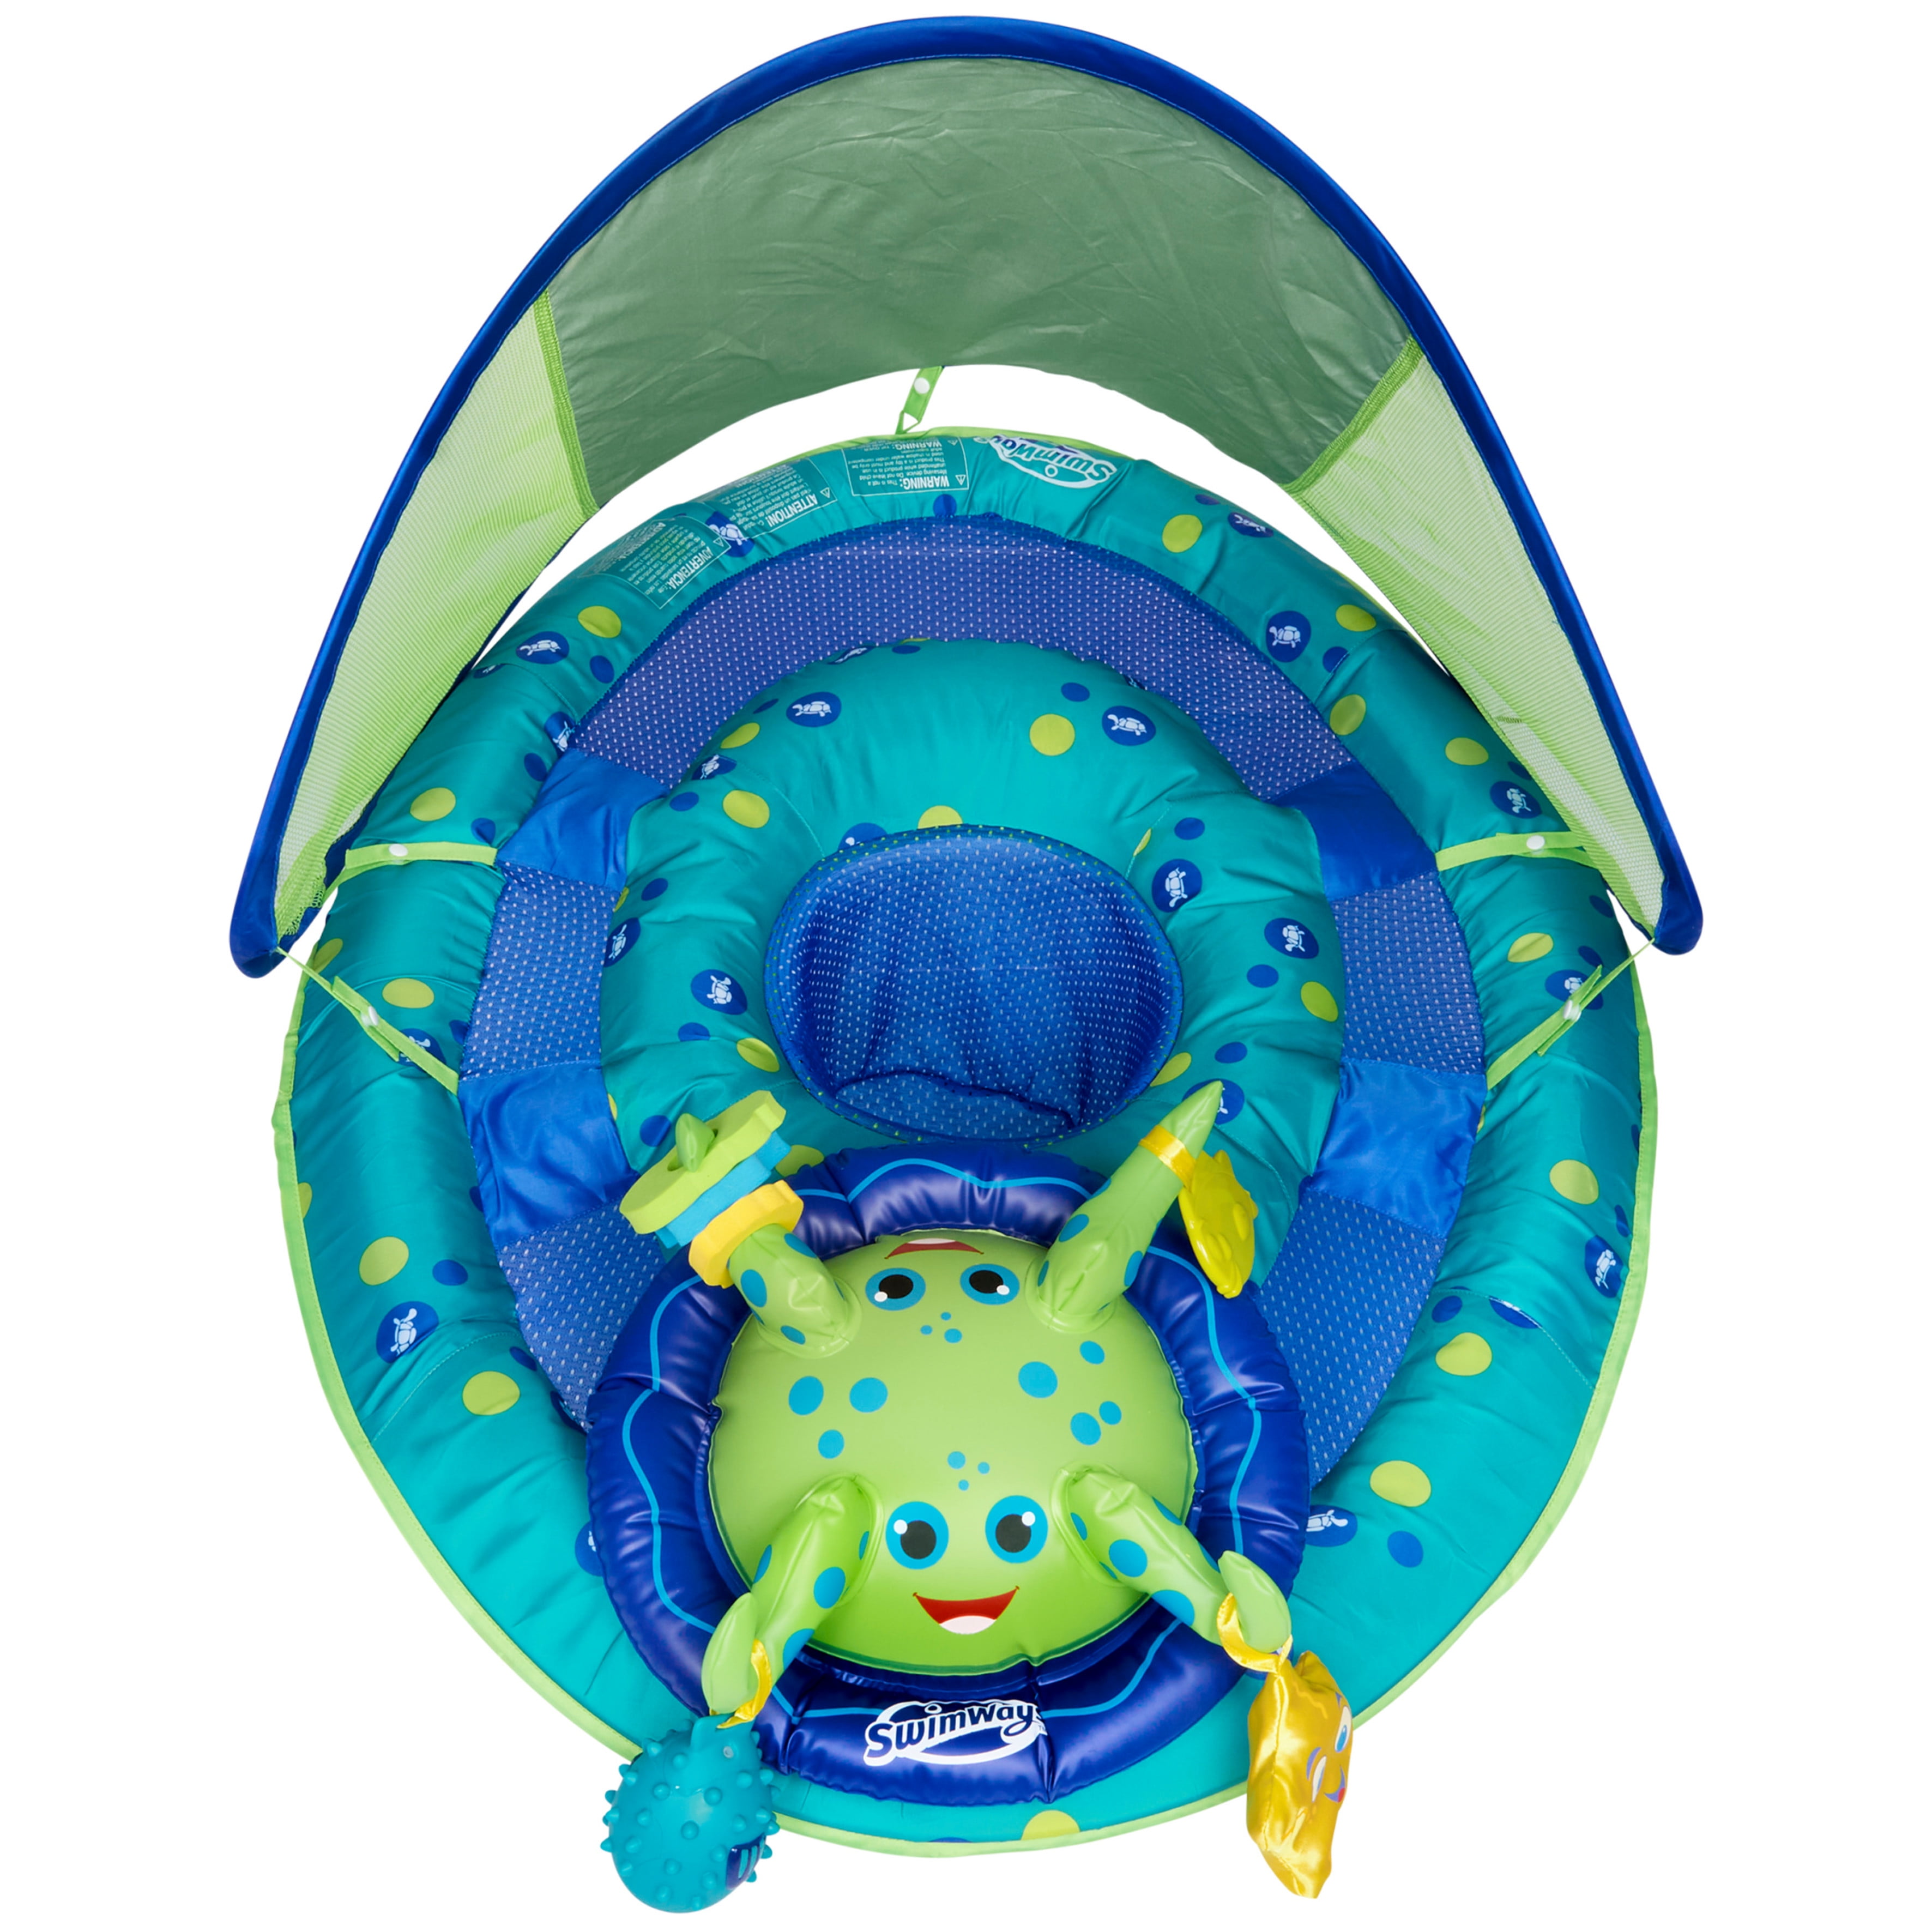 SwimWays Baby Spring Float Activity Center, Inflatable Float for Baby Boys, Blue/Green - image 7 of 8